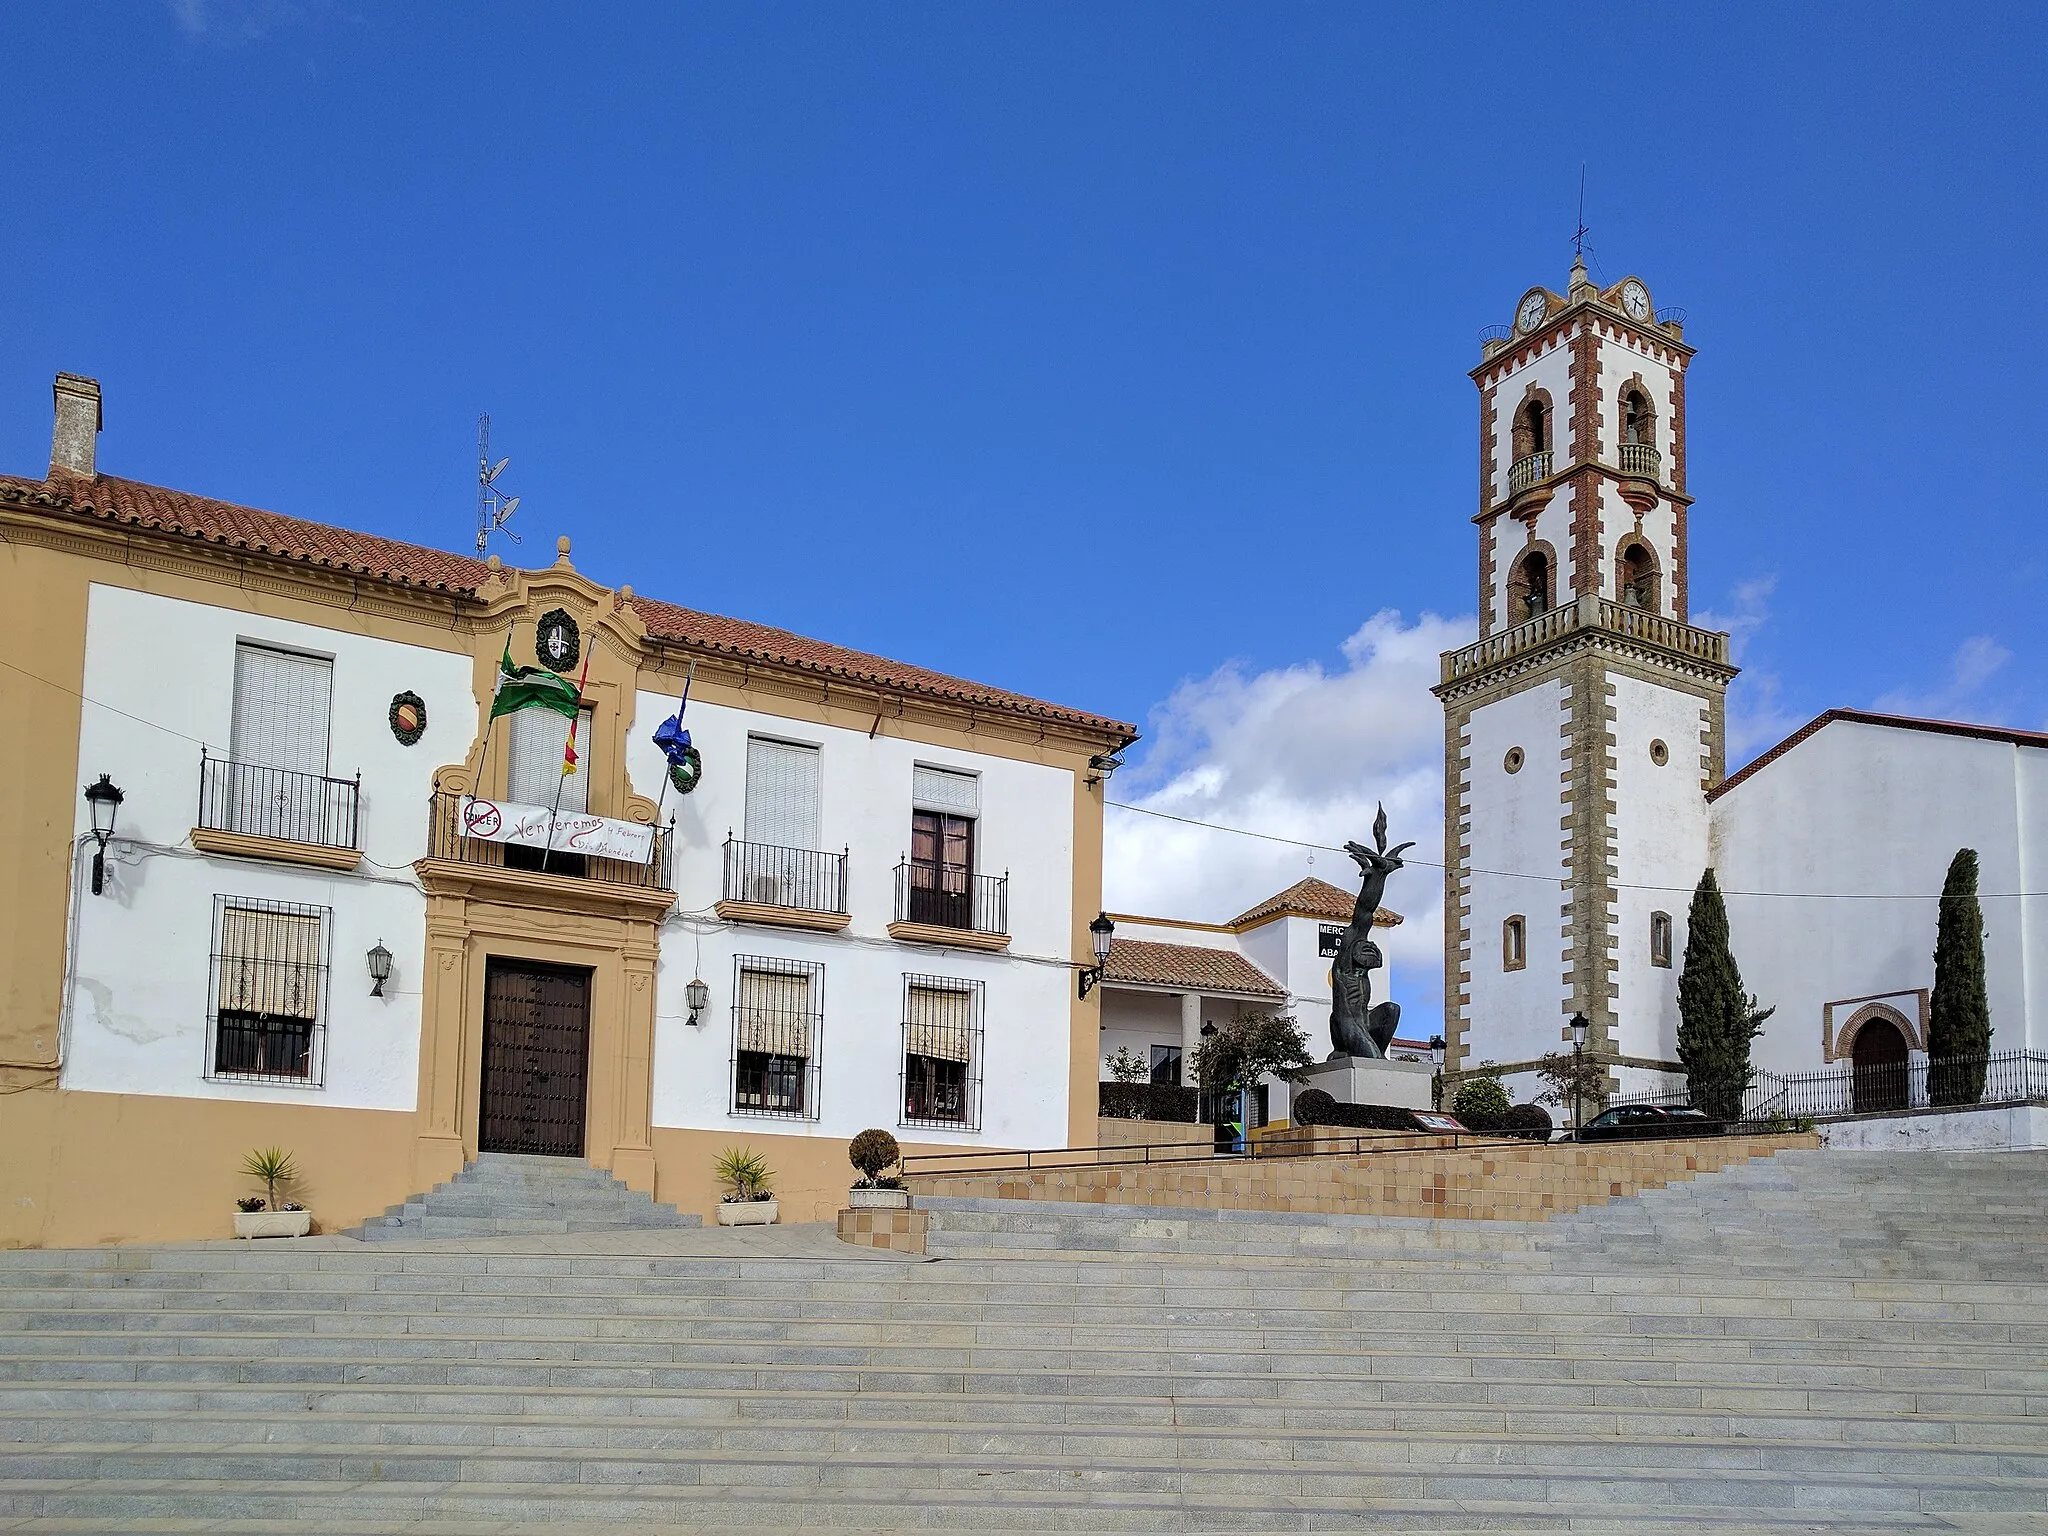 Photo showing: City Hall of the village of Fuente Obejuna in Cordoba, Spain.